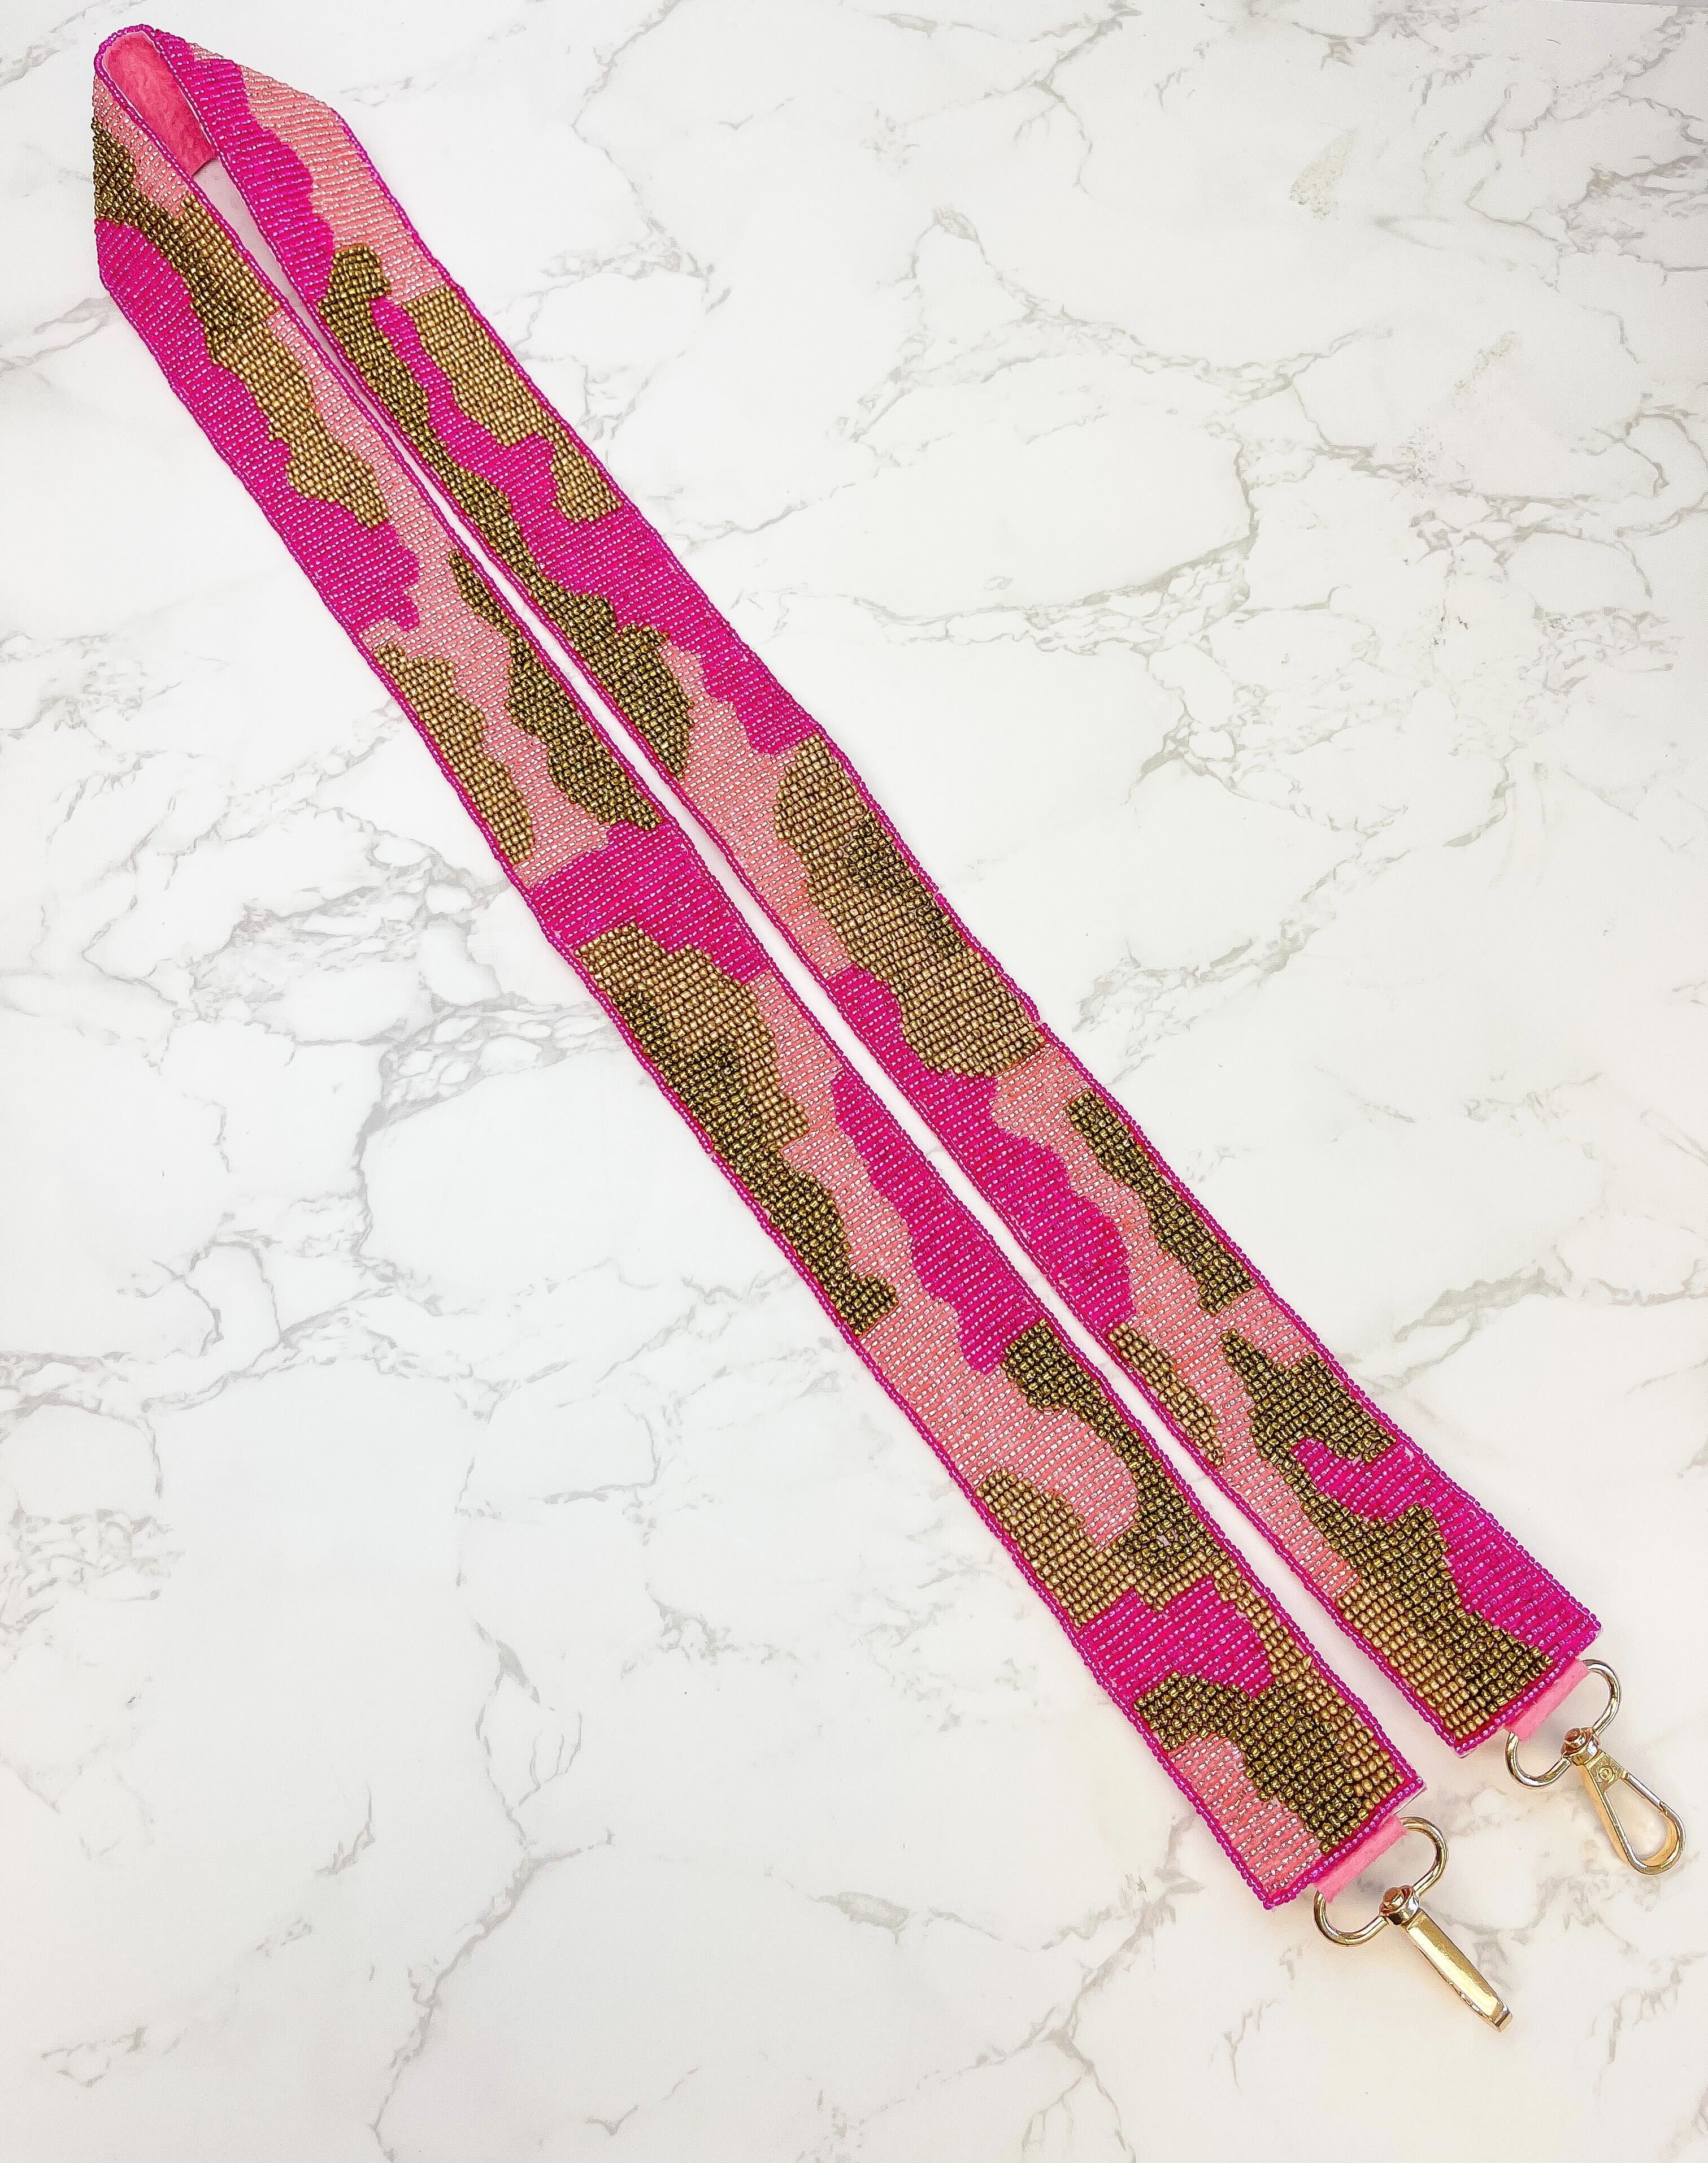 Beaded Purse Strap - Pink Camouflage